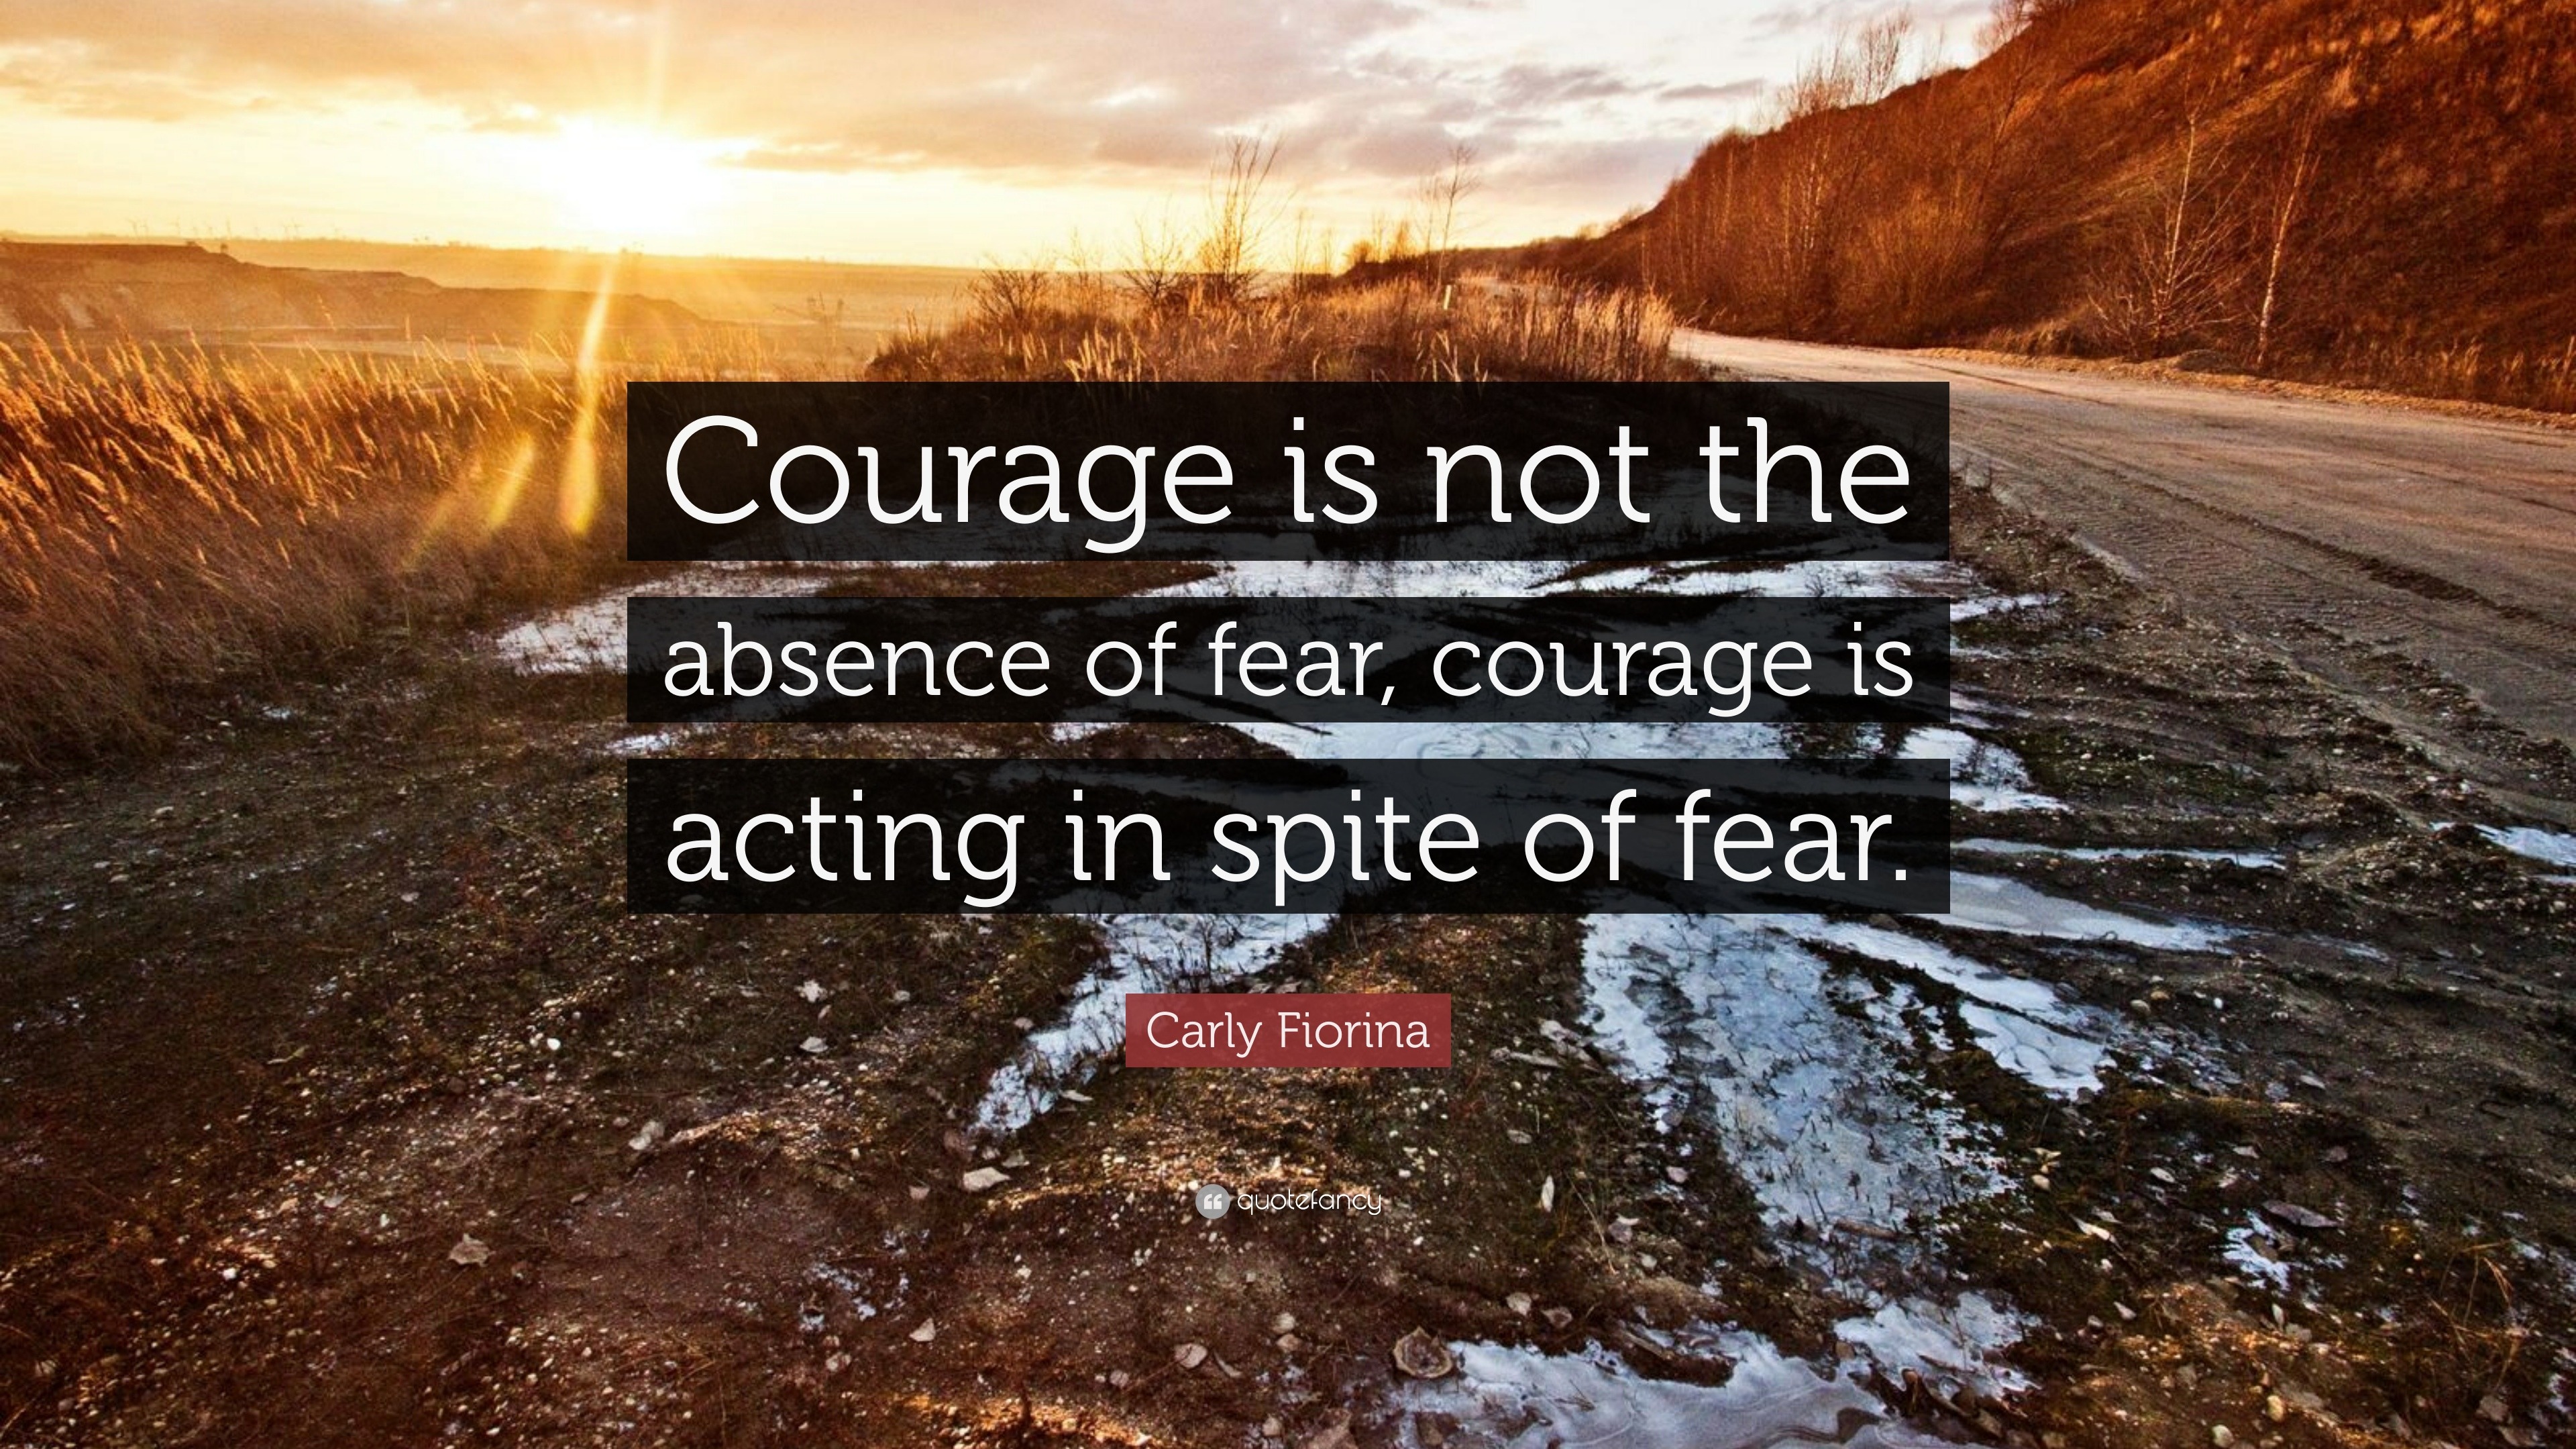 essay on courage is not the absence of fear